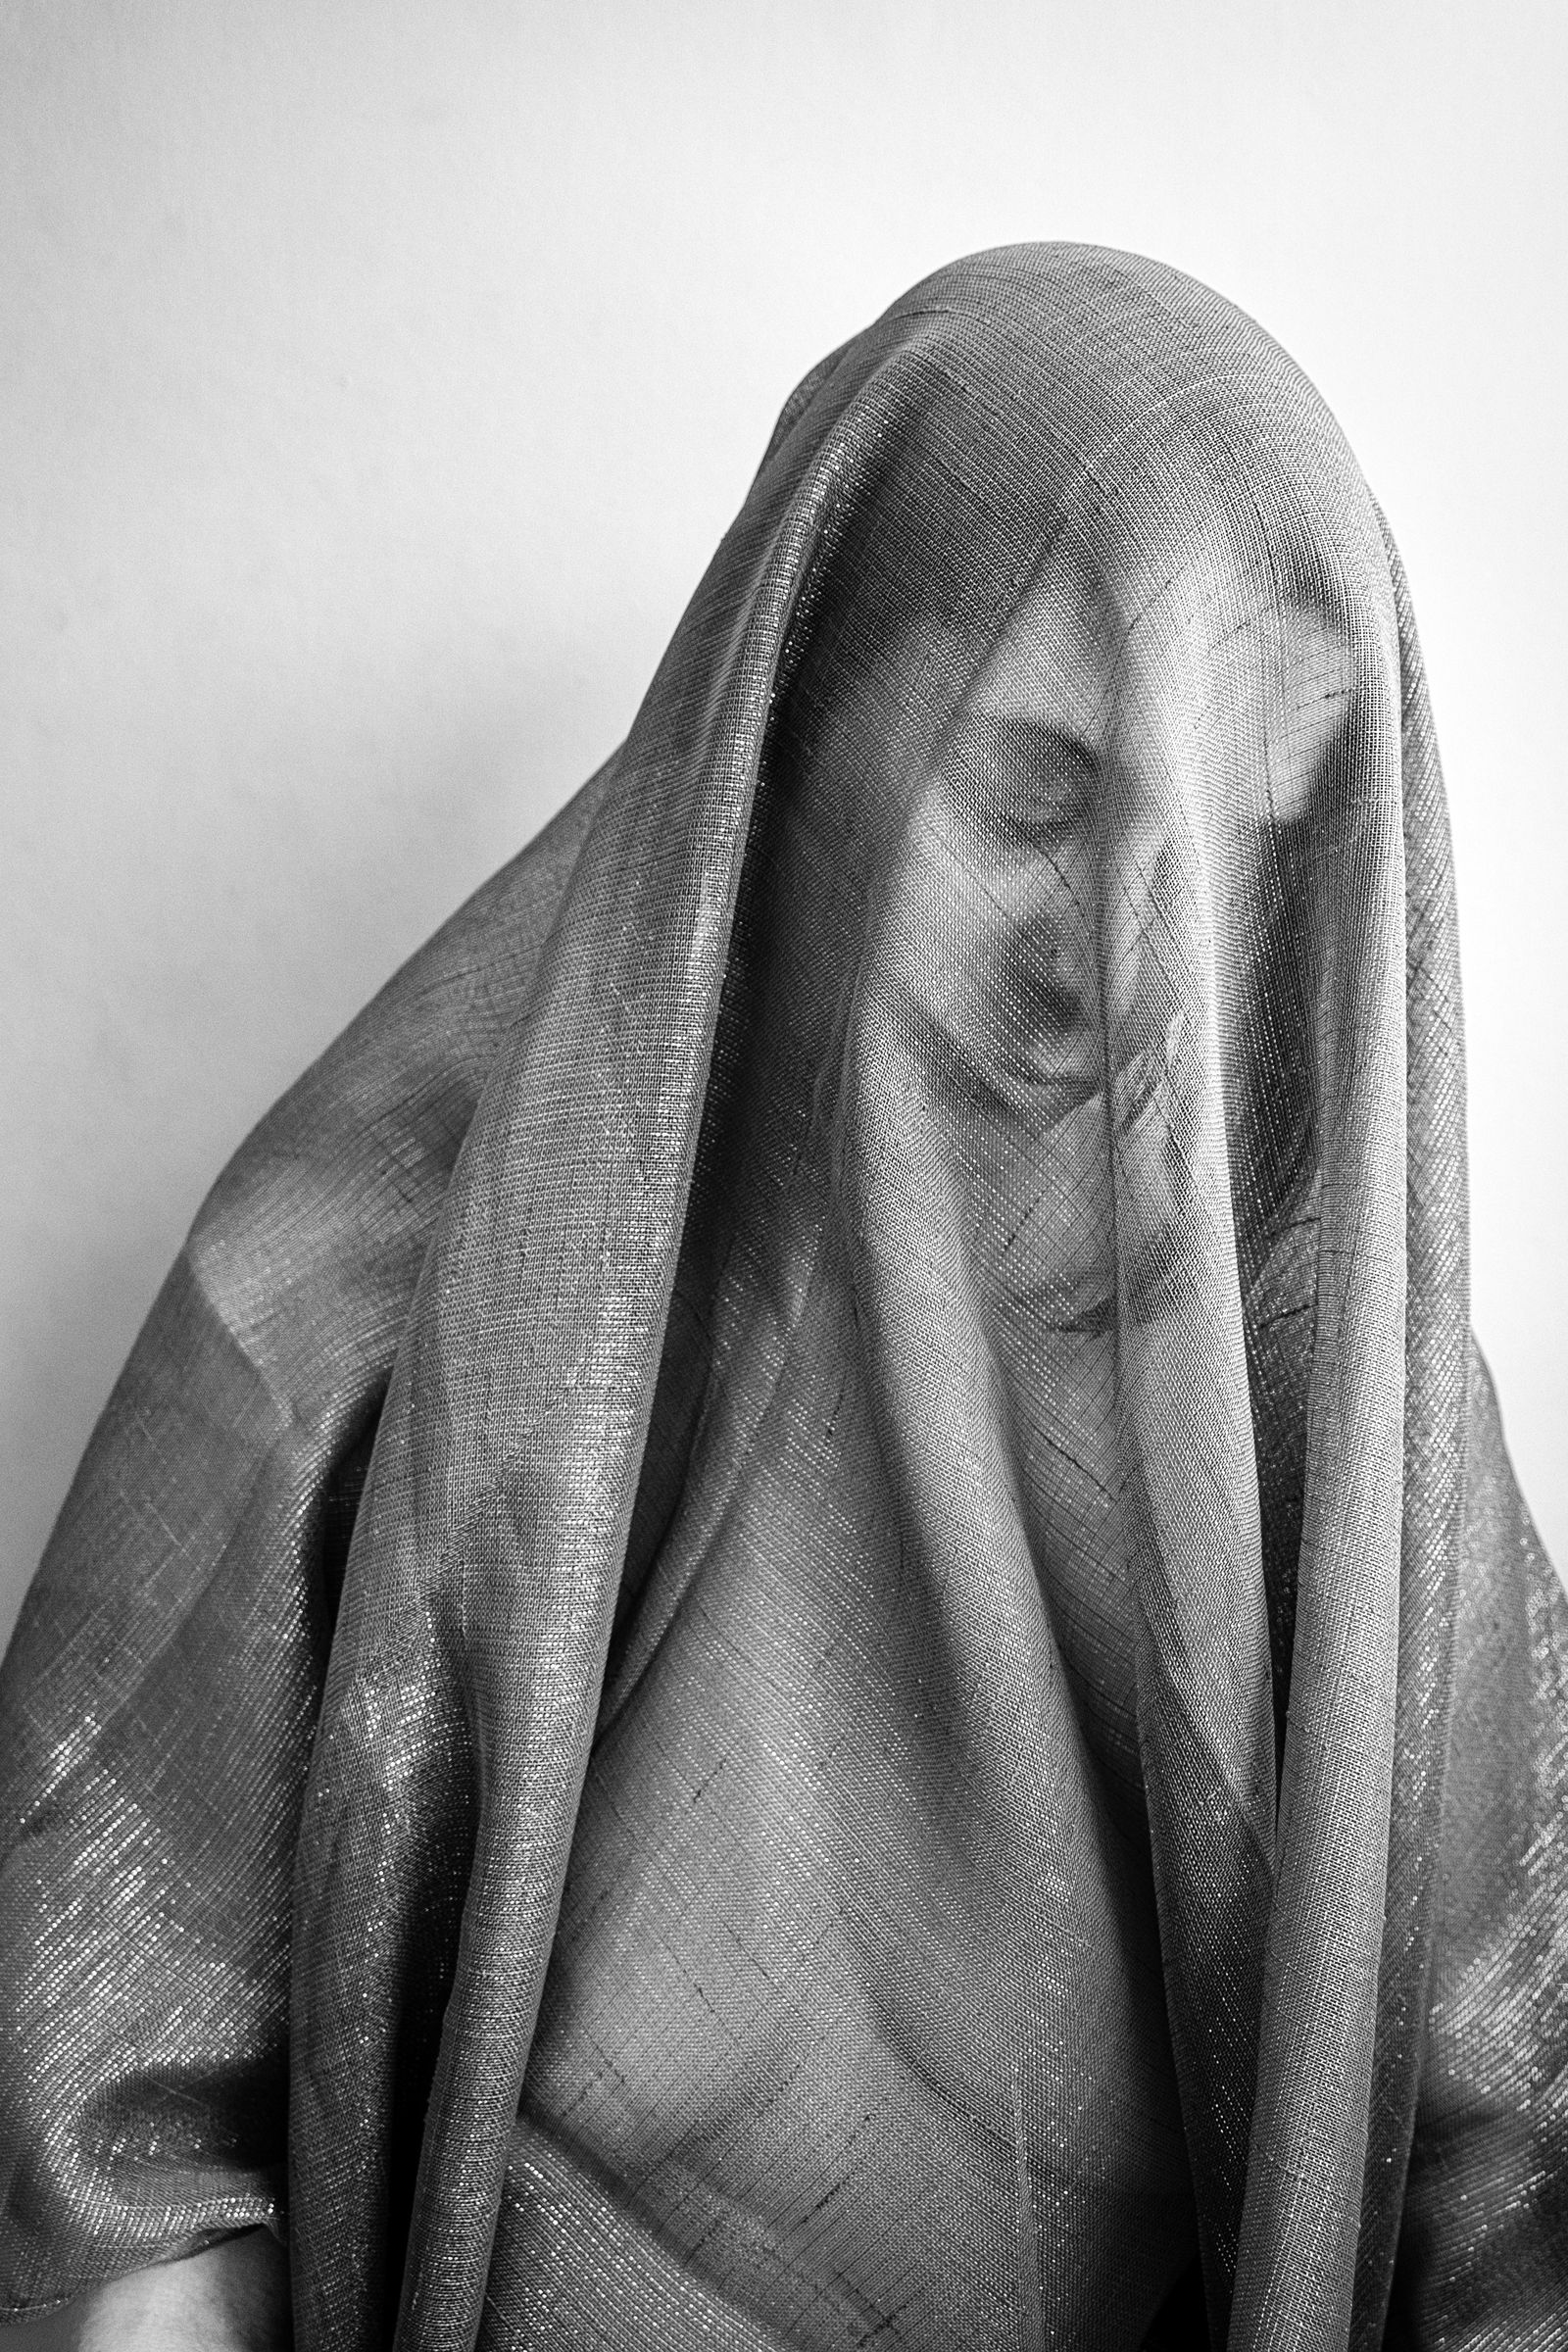 © Claire French - #147 Shrouded